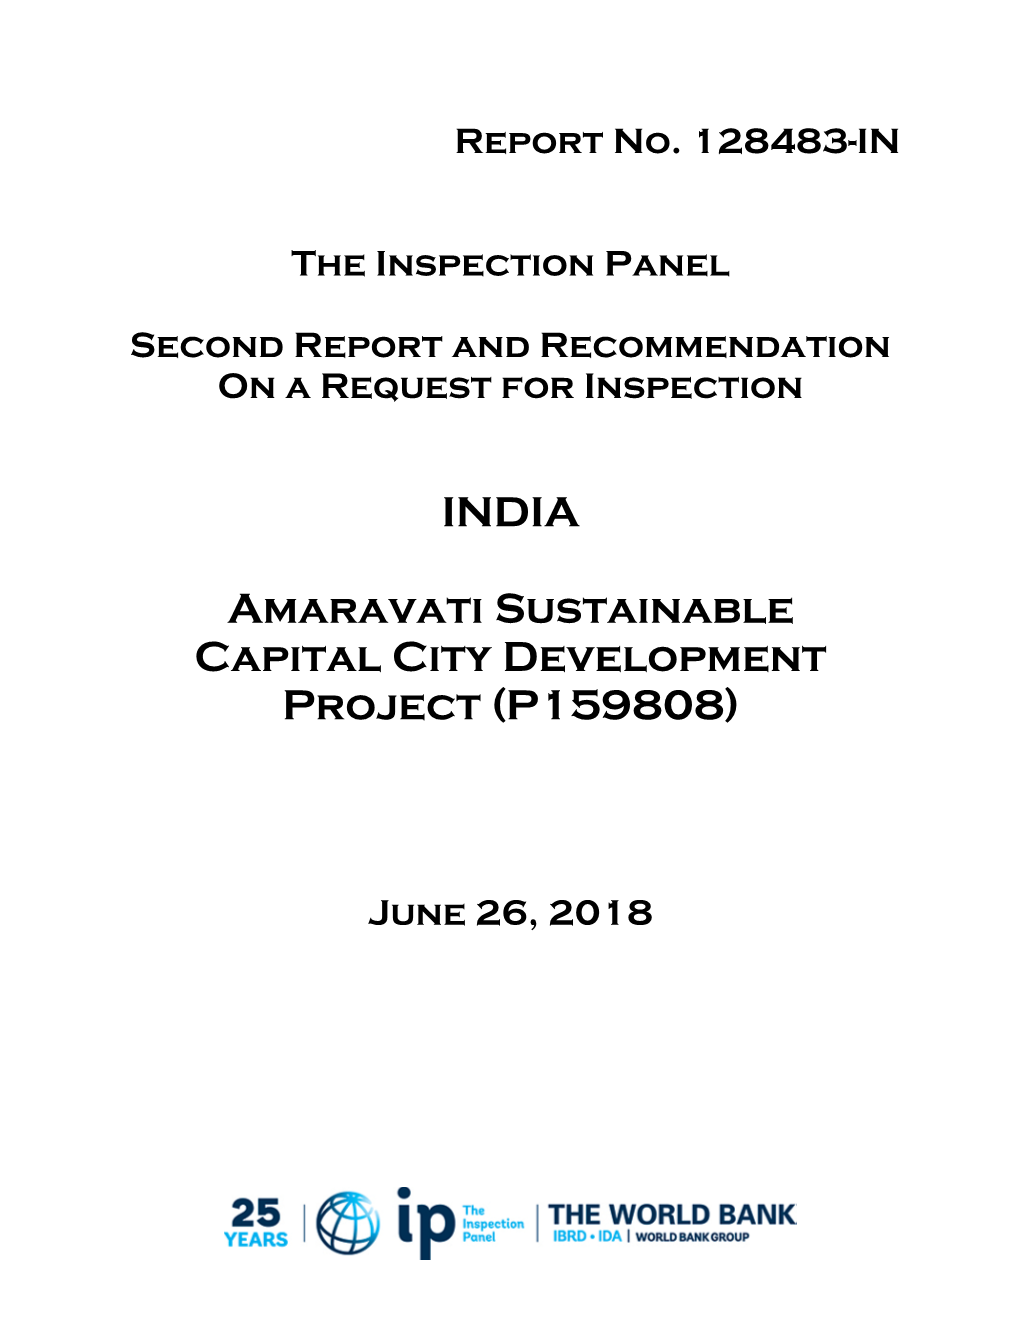 India Amaravati Sustainable Capital City Development Project (The “Proposed Project”)